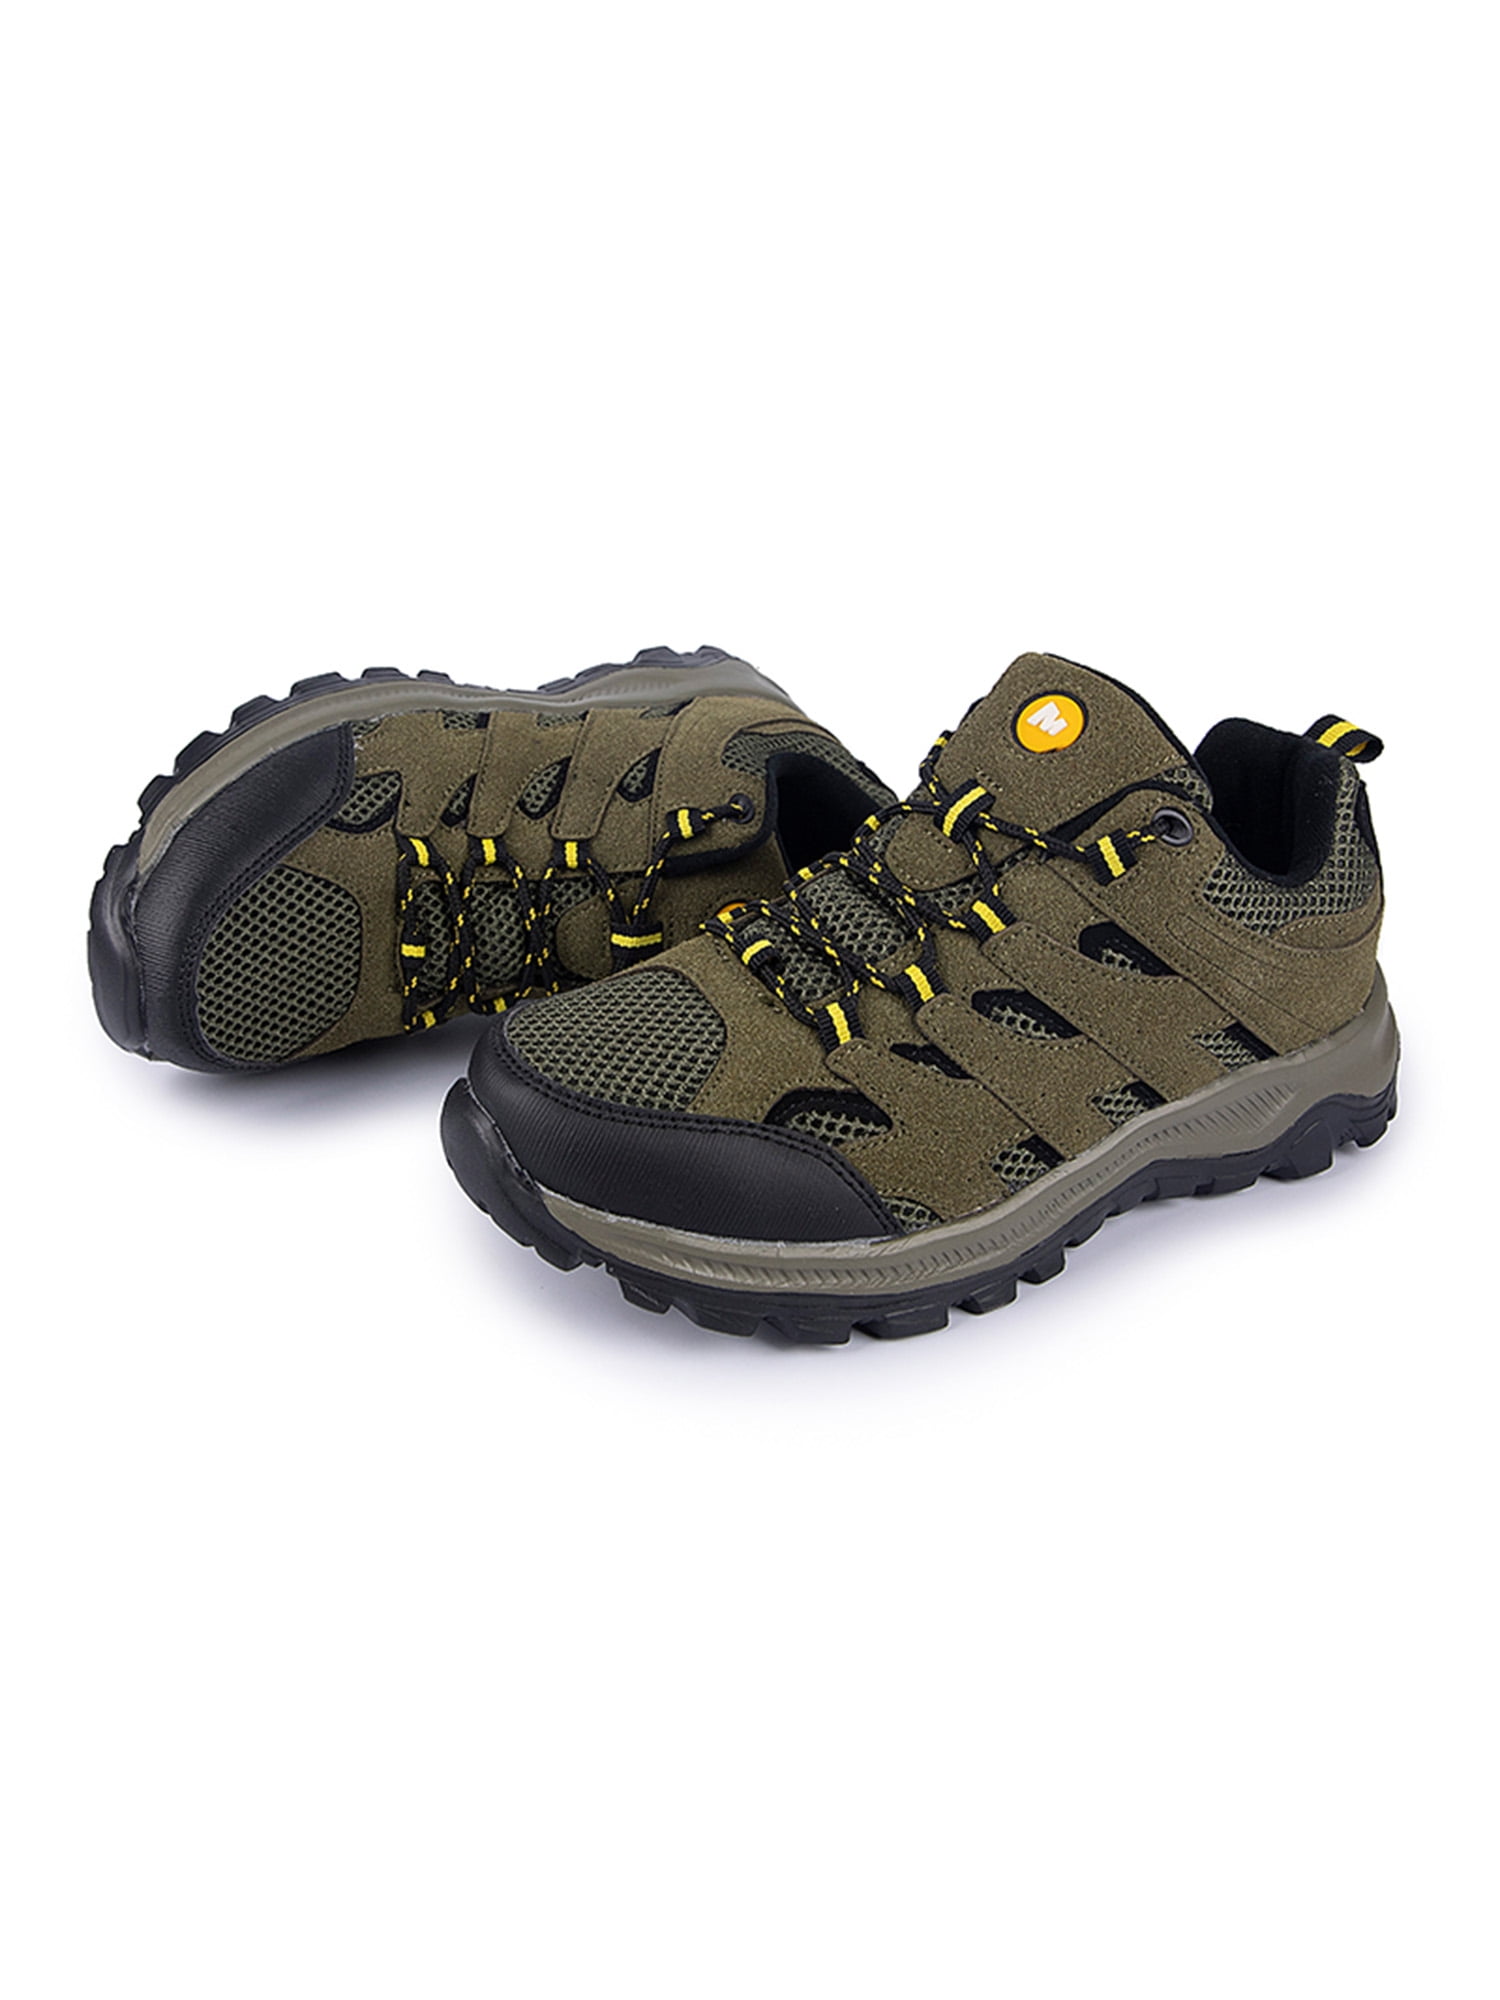 Details about   Men Safety Shoes Lightweight Hiking Trainers Sneaker Steel Toe Cap Work Boots G1 